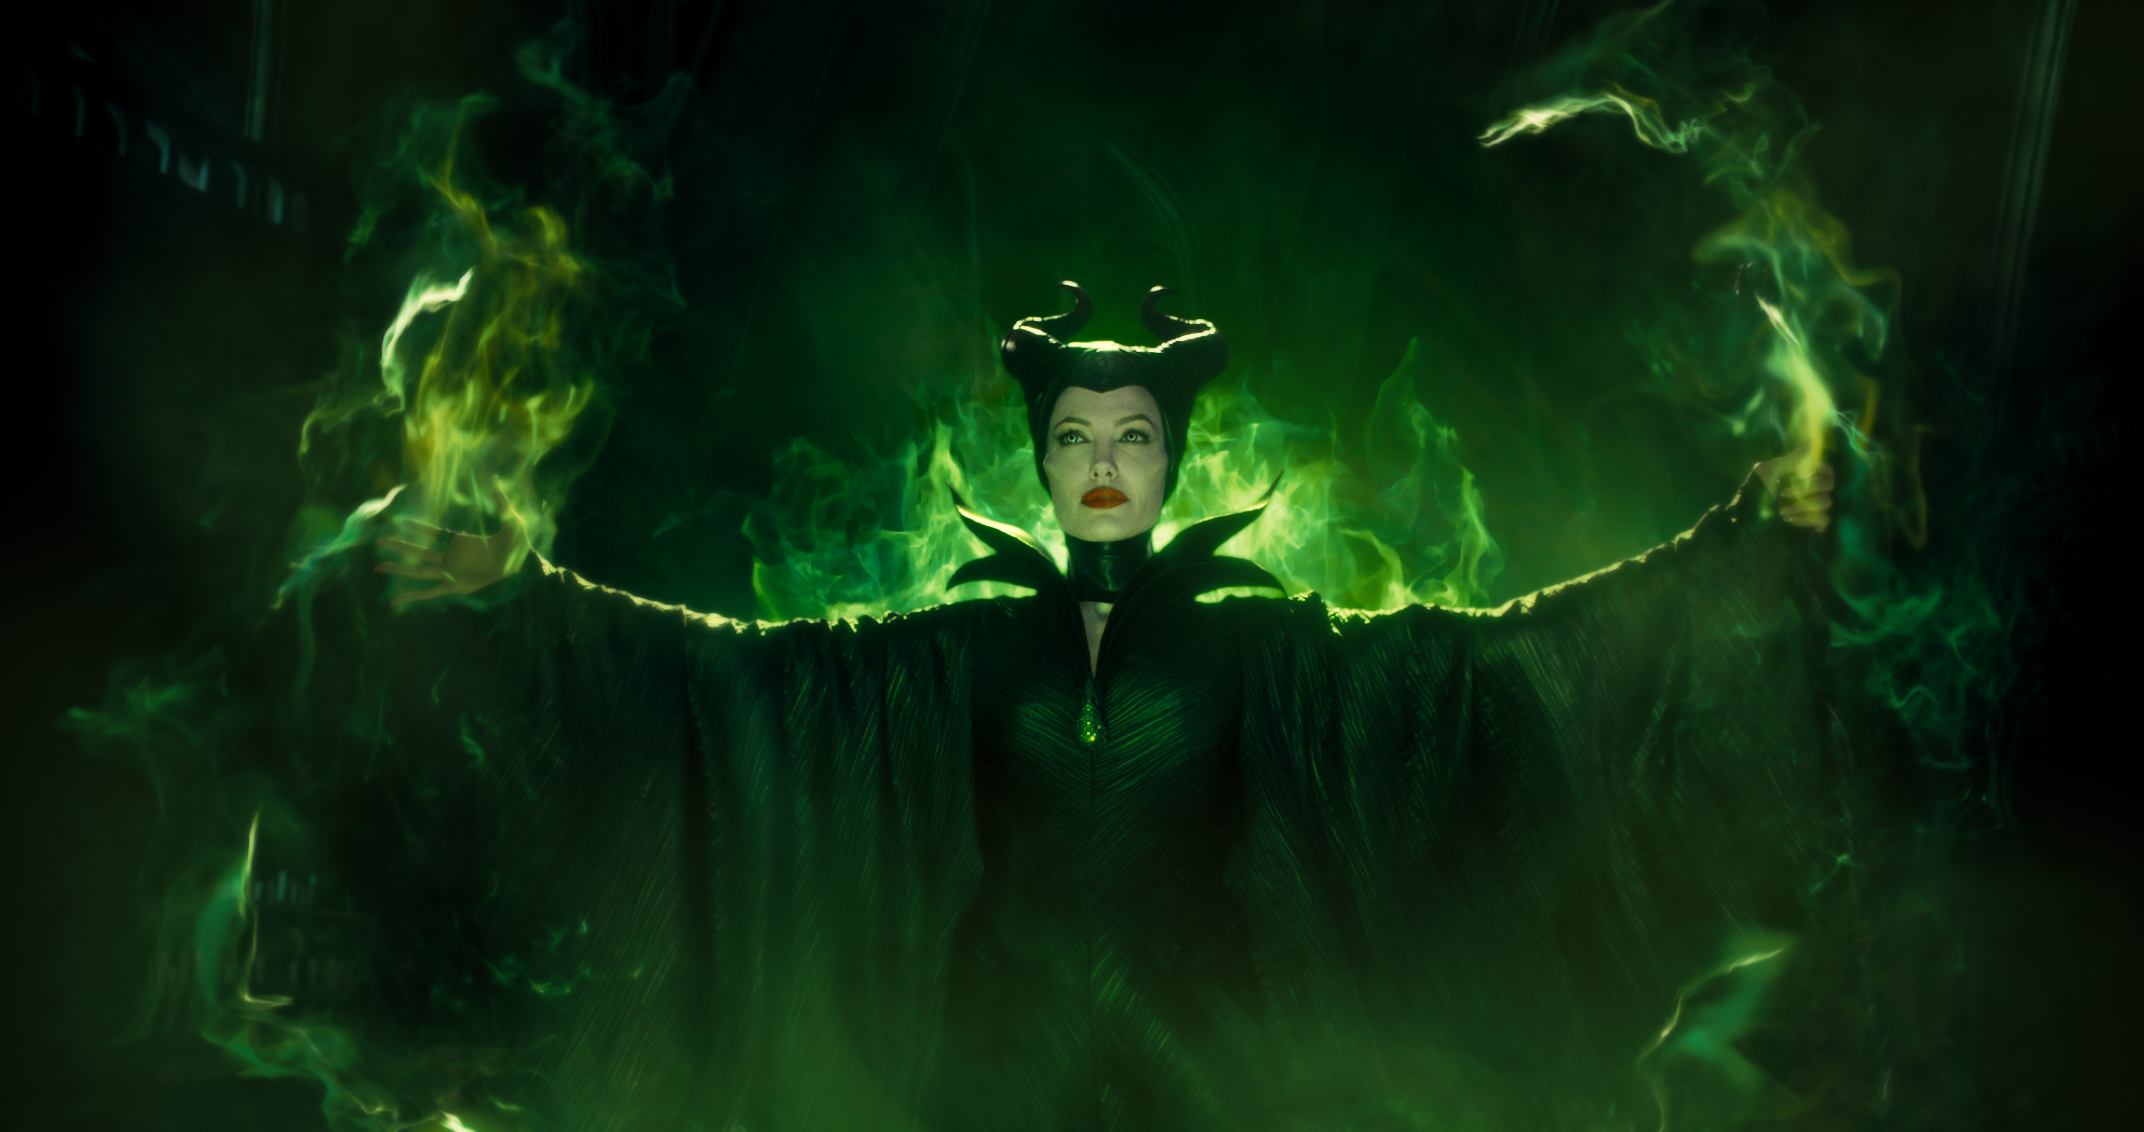 MALEFICENT Tells A Fractured Fairy Tale